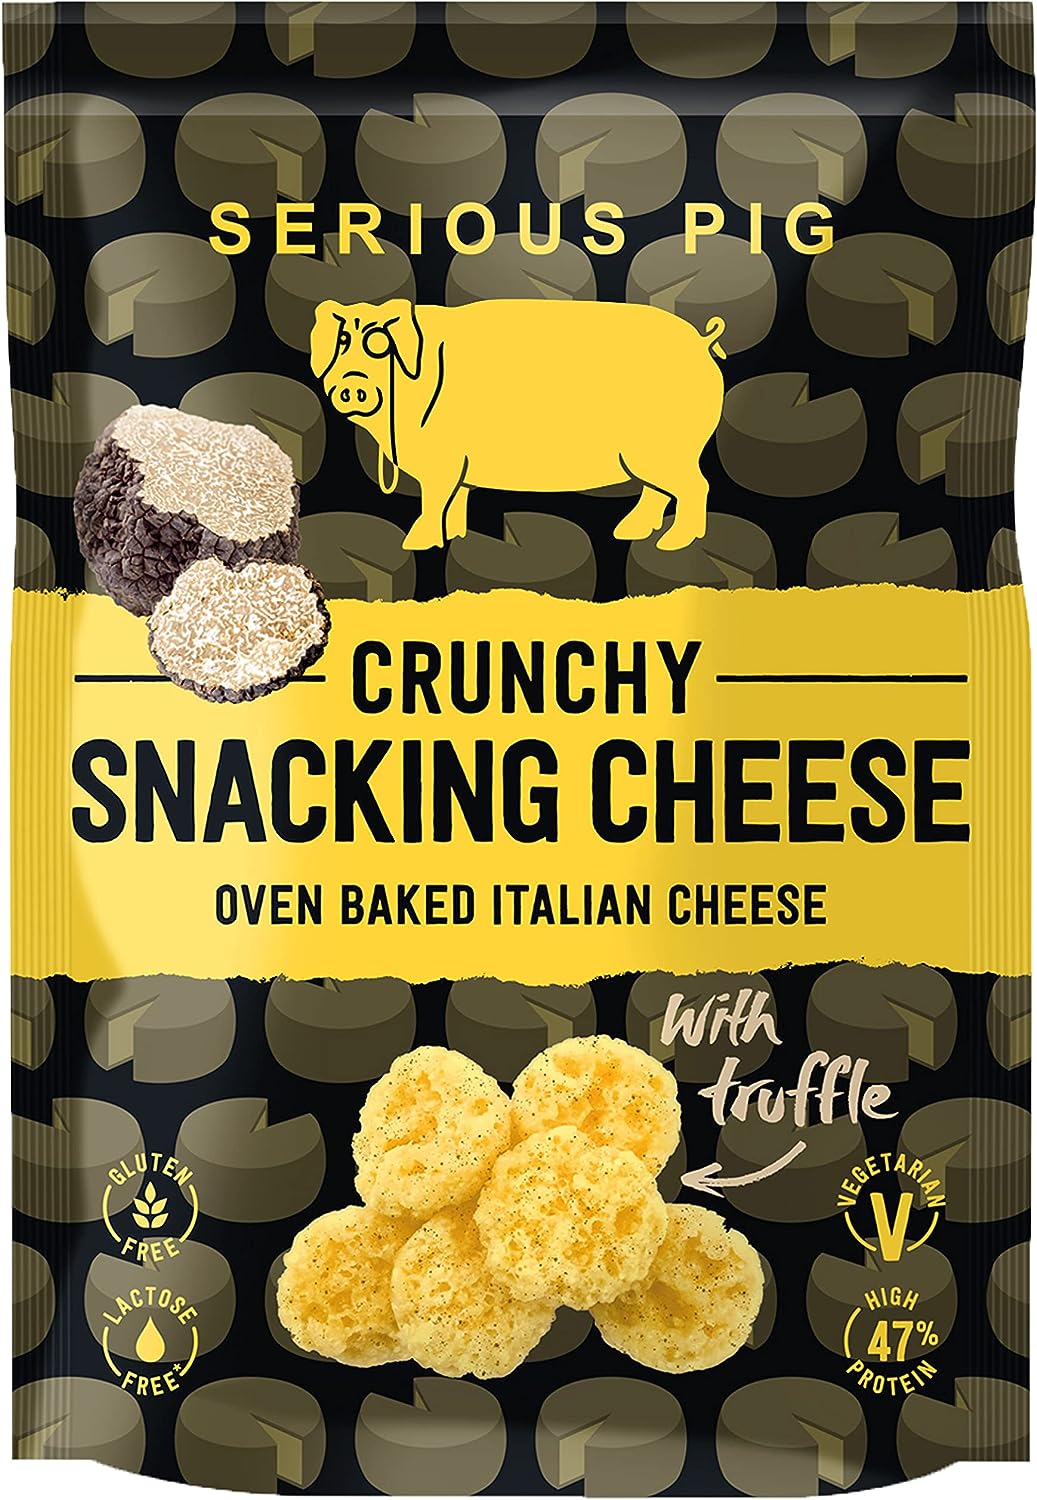 Serious Pig Crunchy Snacking Cheese with Truffle 24g RRP £1.50 CLEARANCE XL 99p